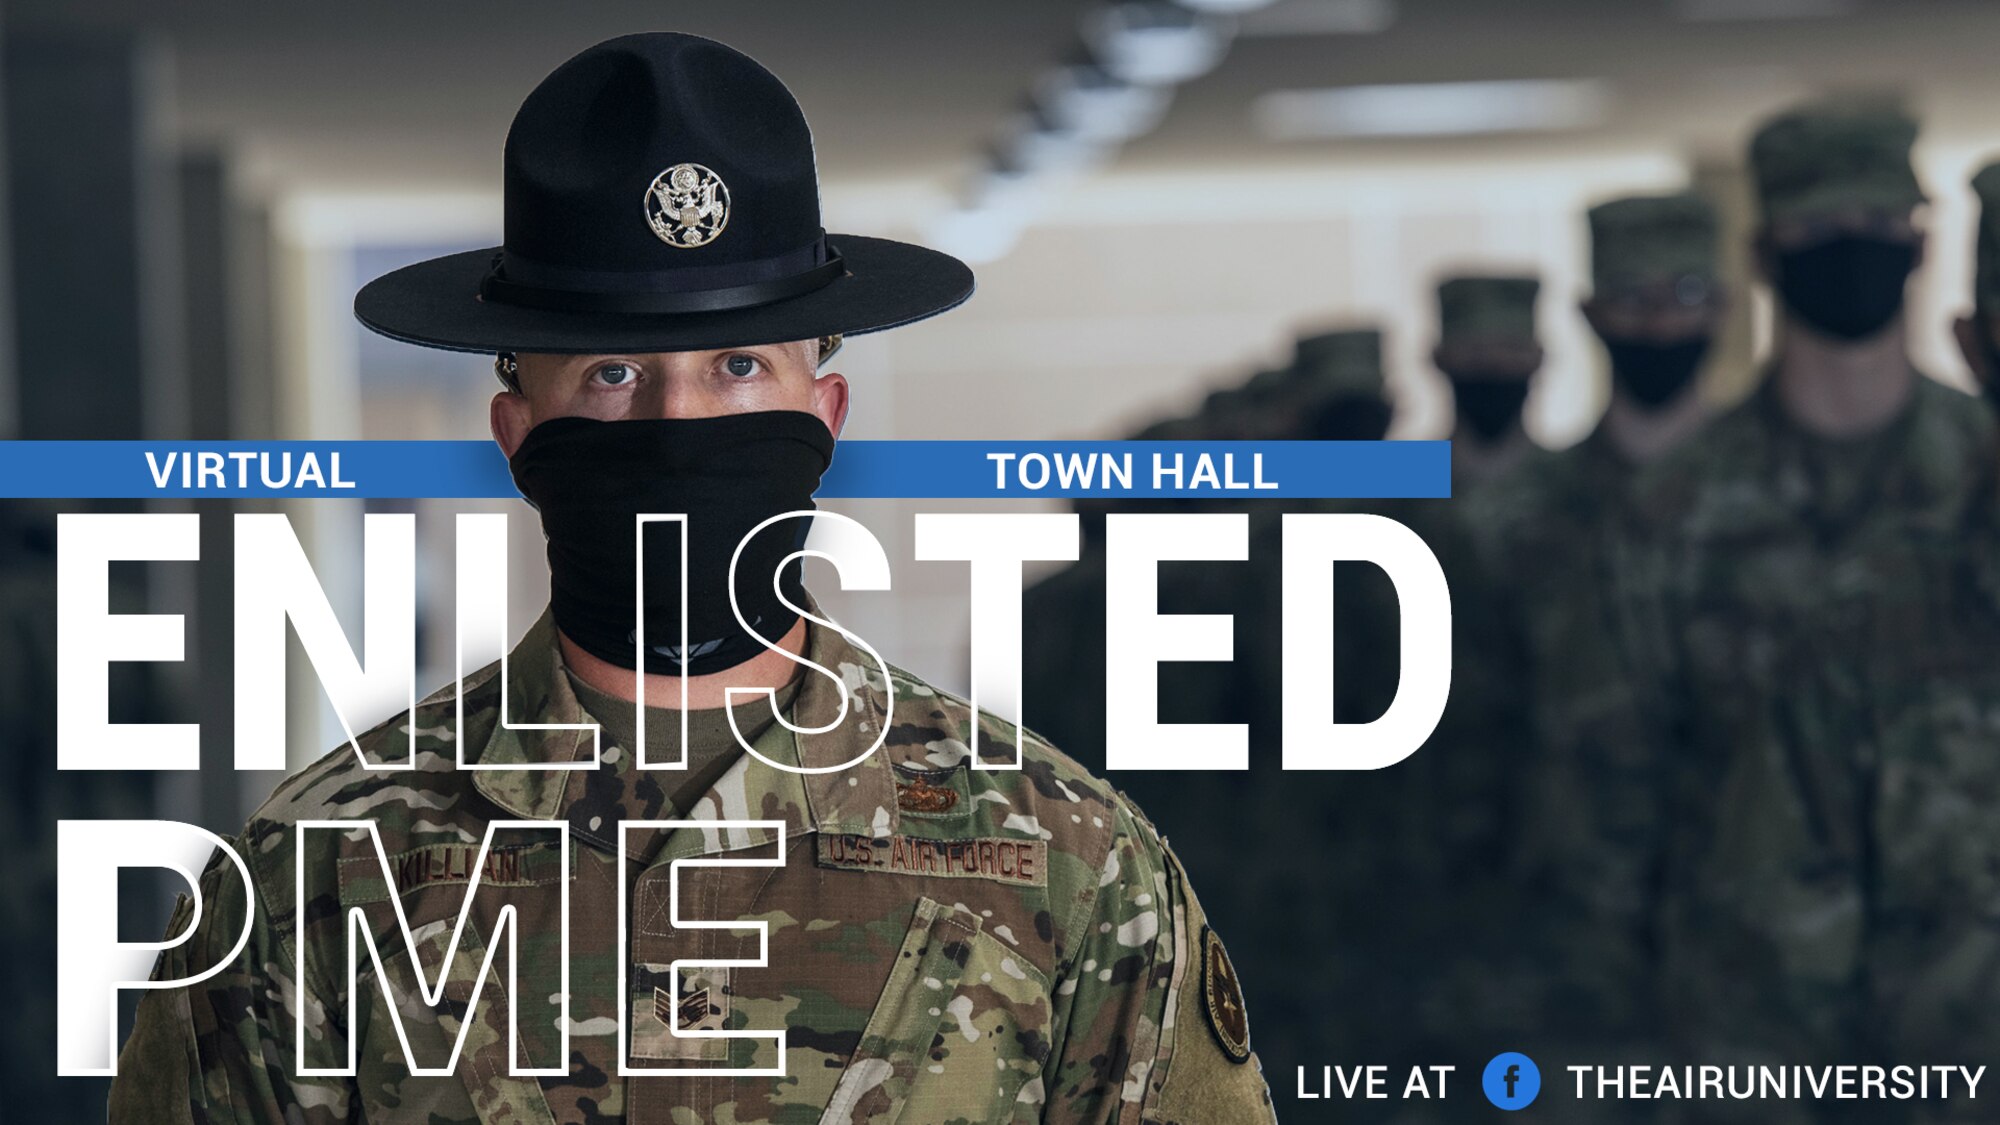 Virtual Town Hall: Enlisted PME